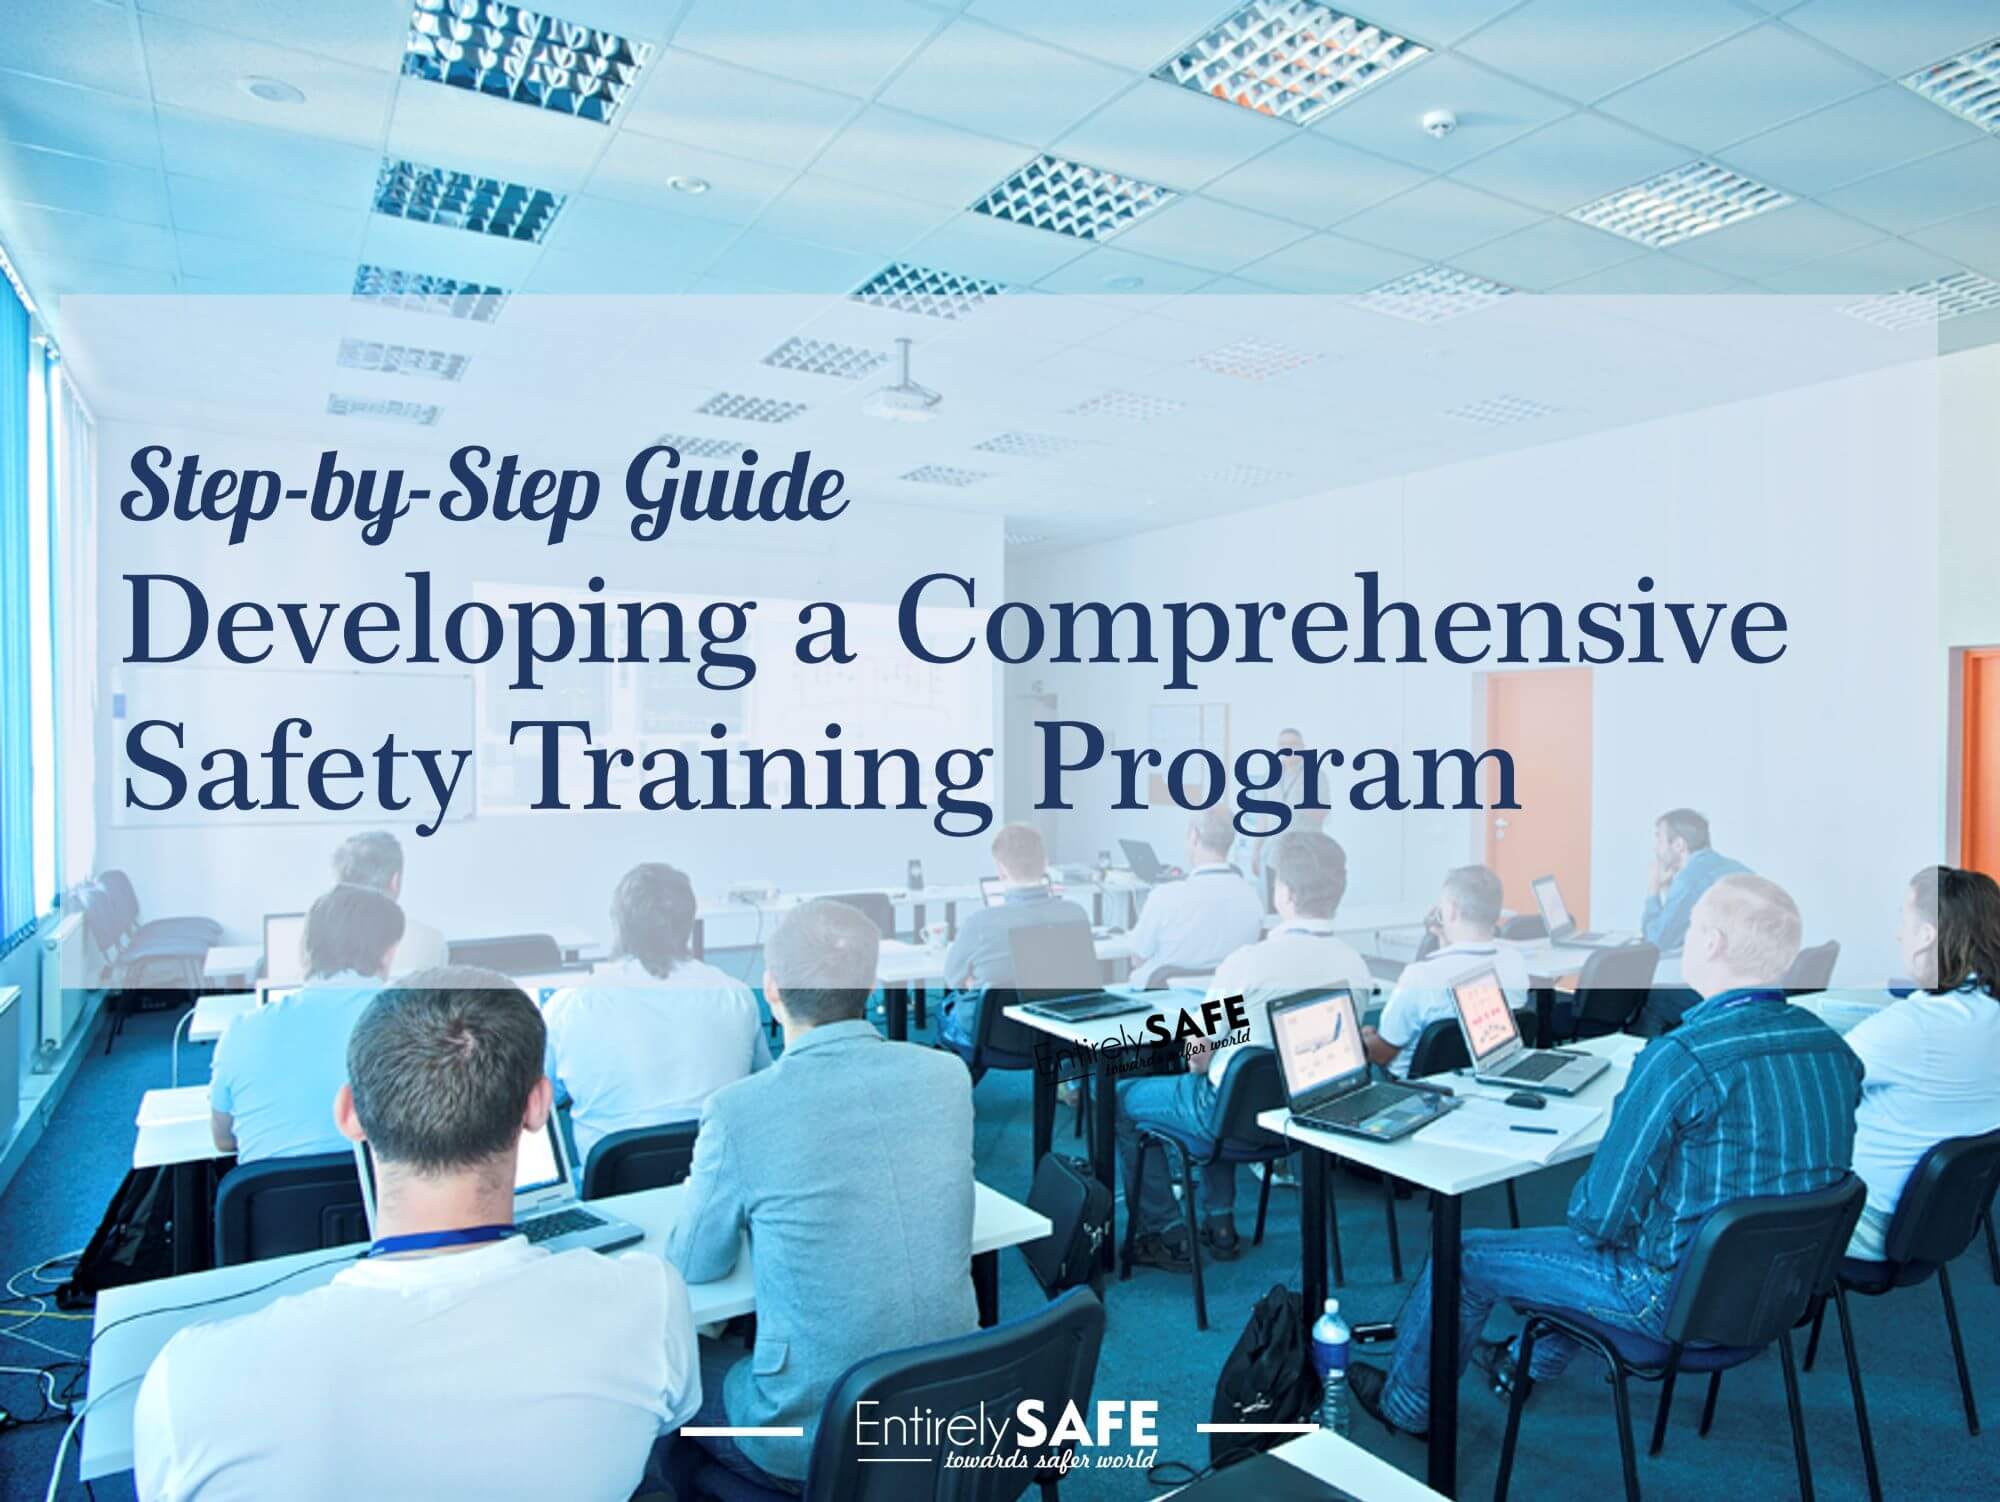 5 Steps to Developing a Comprehensive Safety Training Program